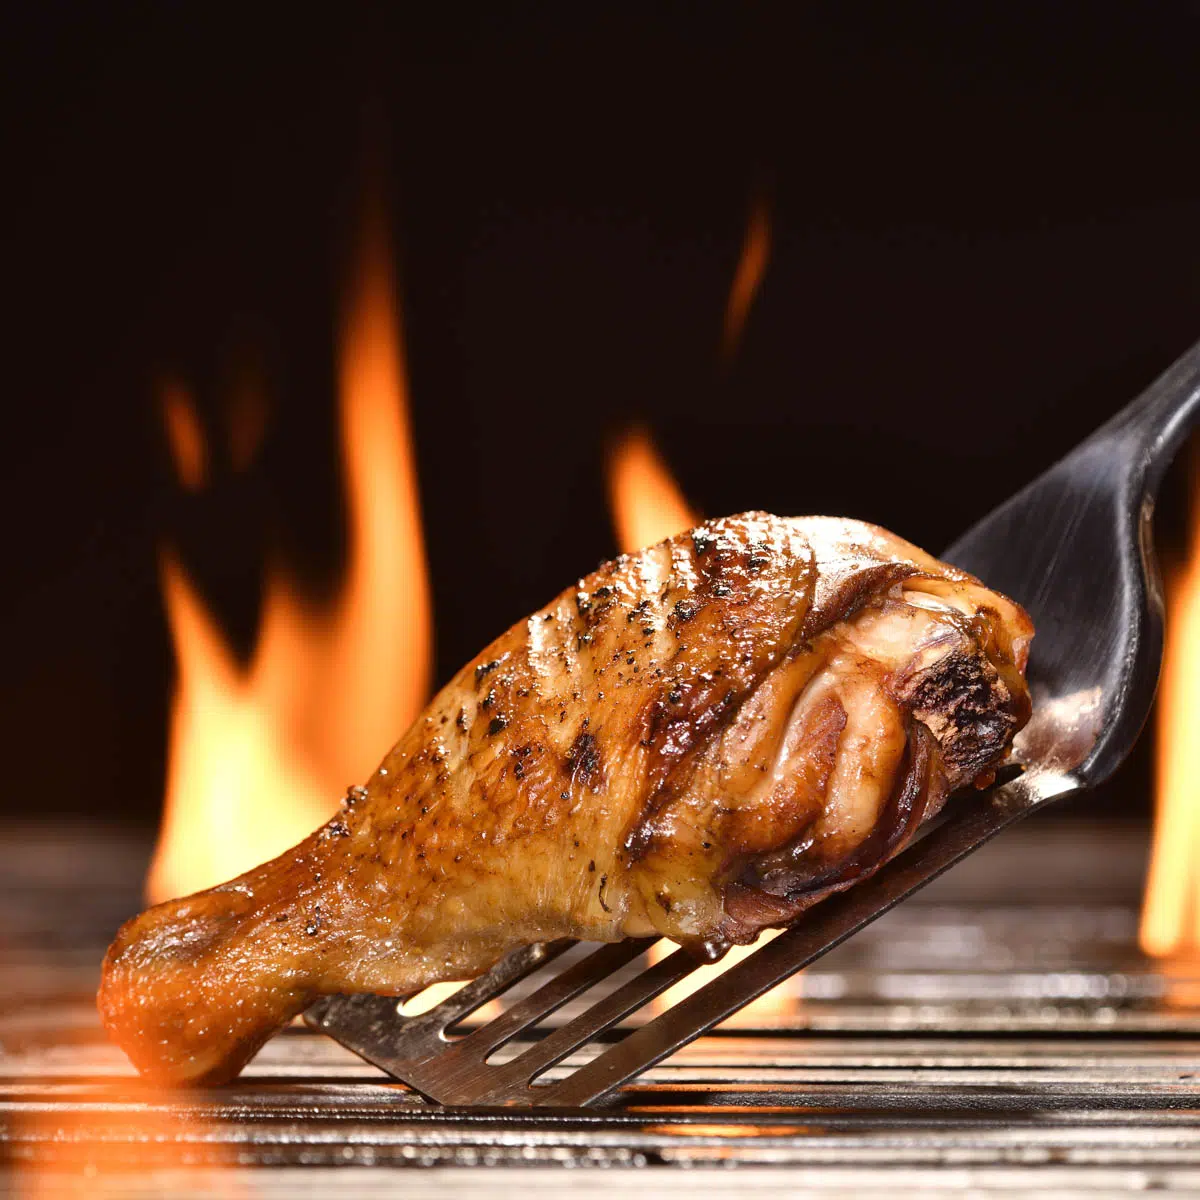 Grilled chicken leg on a flaming grill.